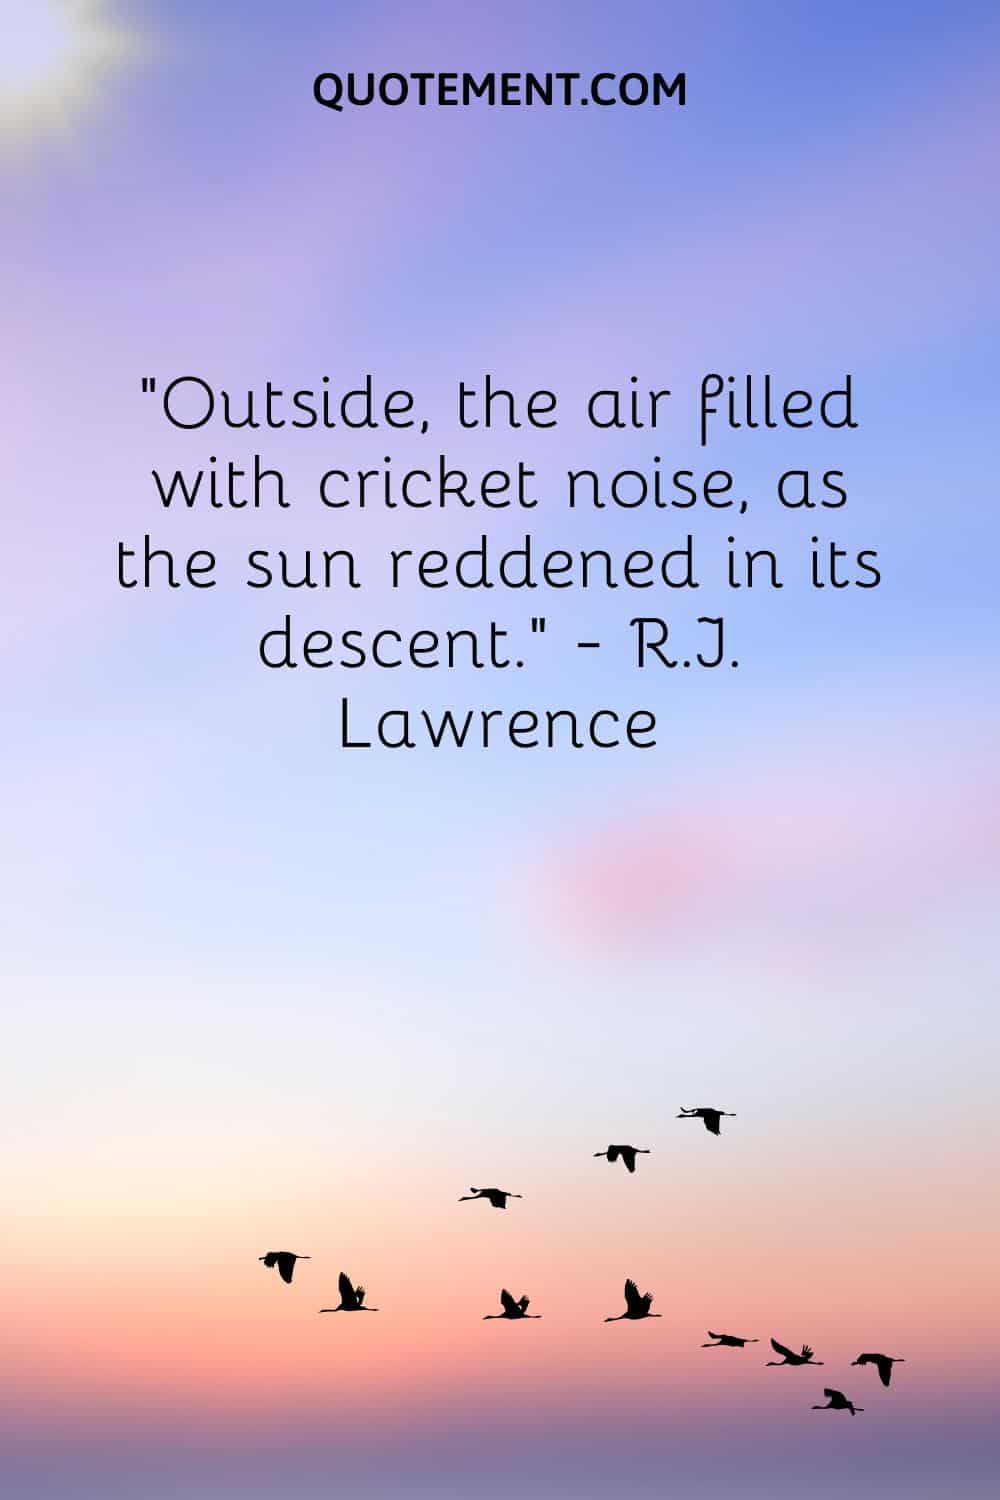 Outside, the air filled with cricket noise, as the sun reddened in its descent